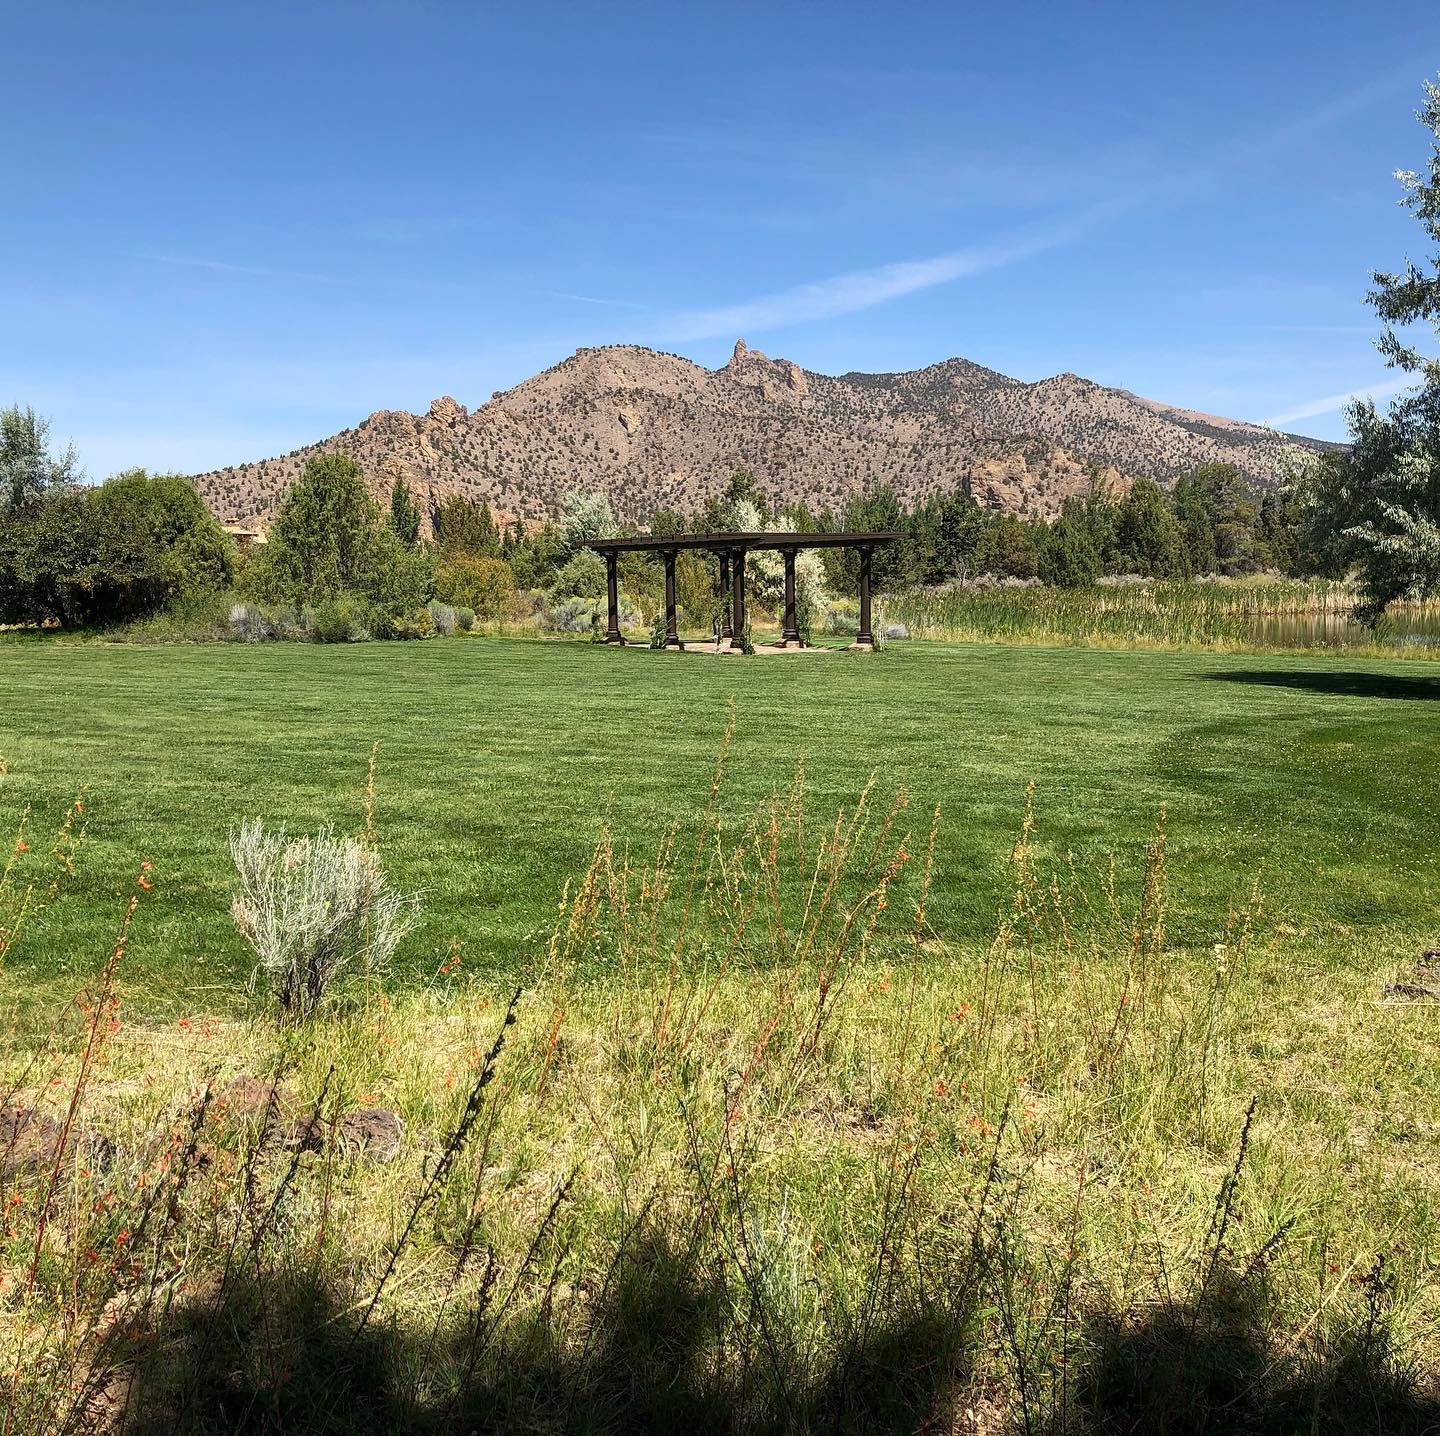 We know how to social distance at #ranchatthecanyons with @14,900 square feet at our outdoor Tuscan Stables venue! #outdooreventvenues #outdoorweddingvenue